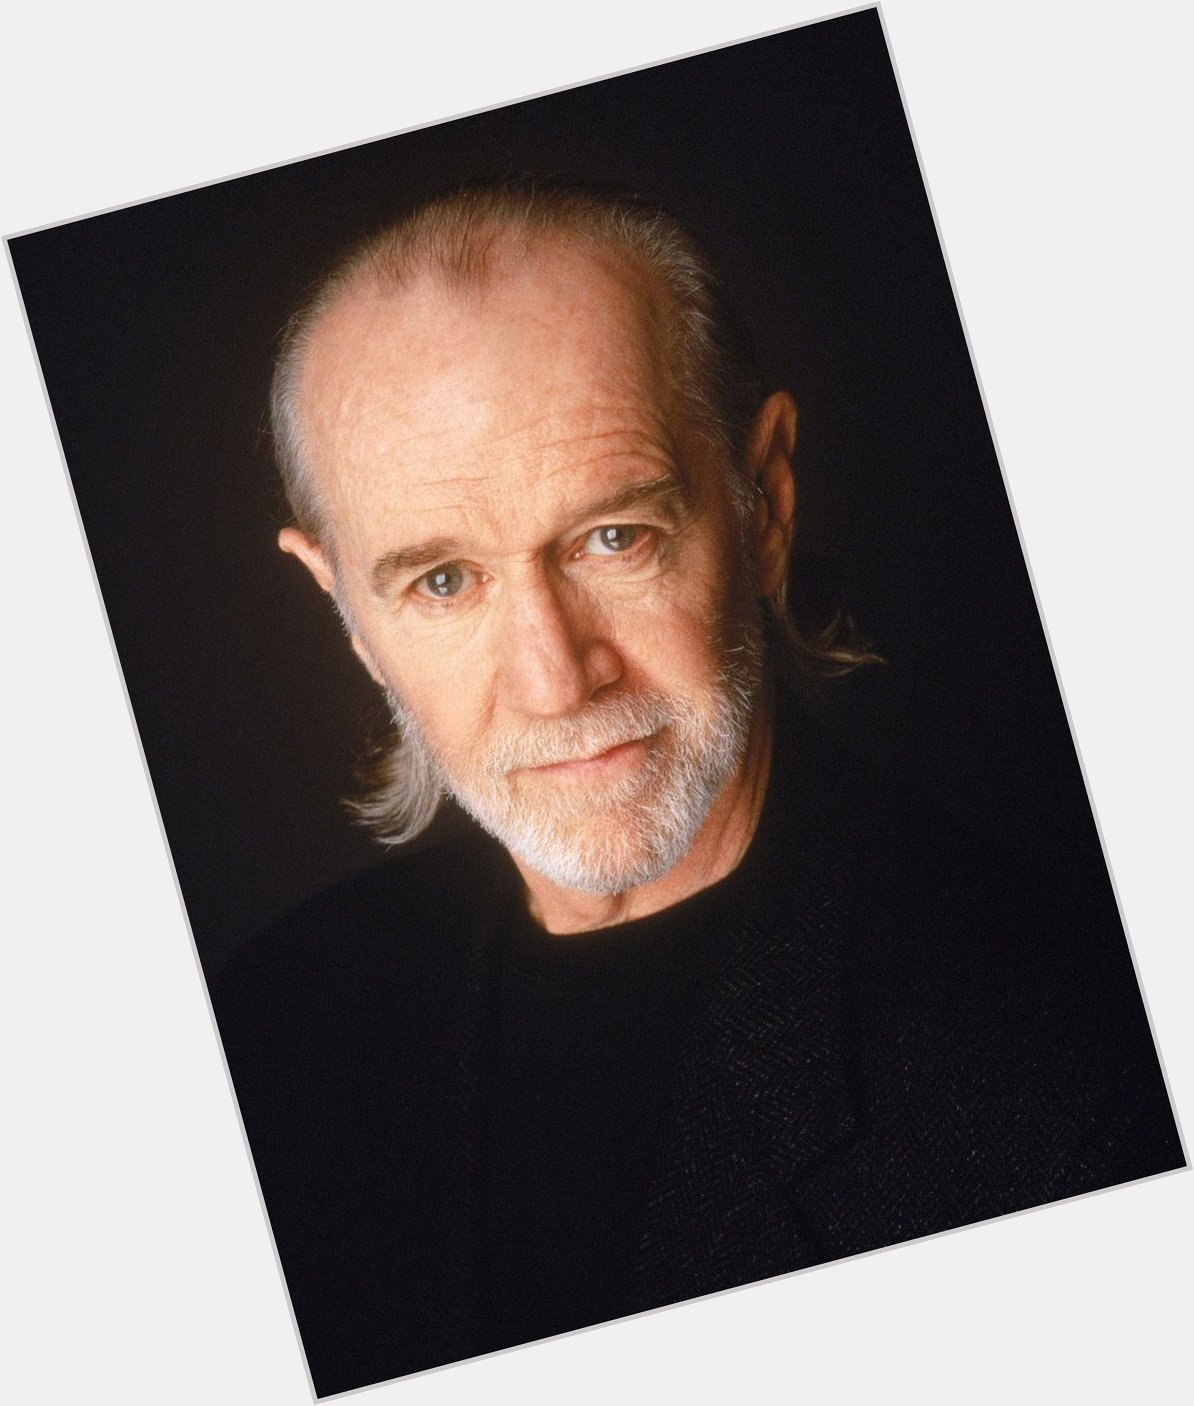 Going to bed 
and Happy Birthday to George Carlin & The Railway Series 